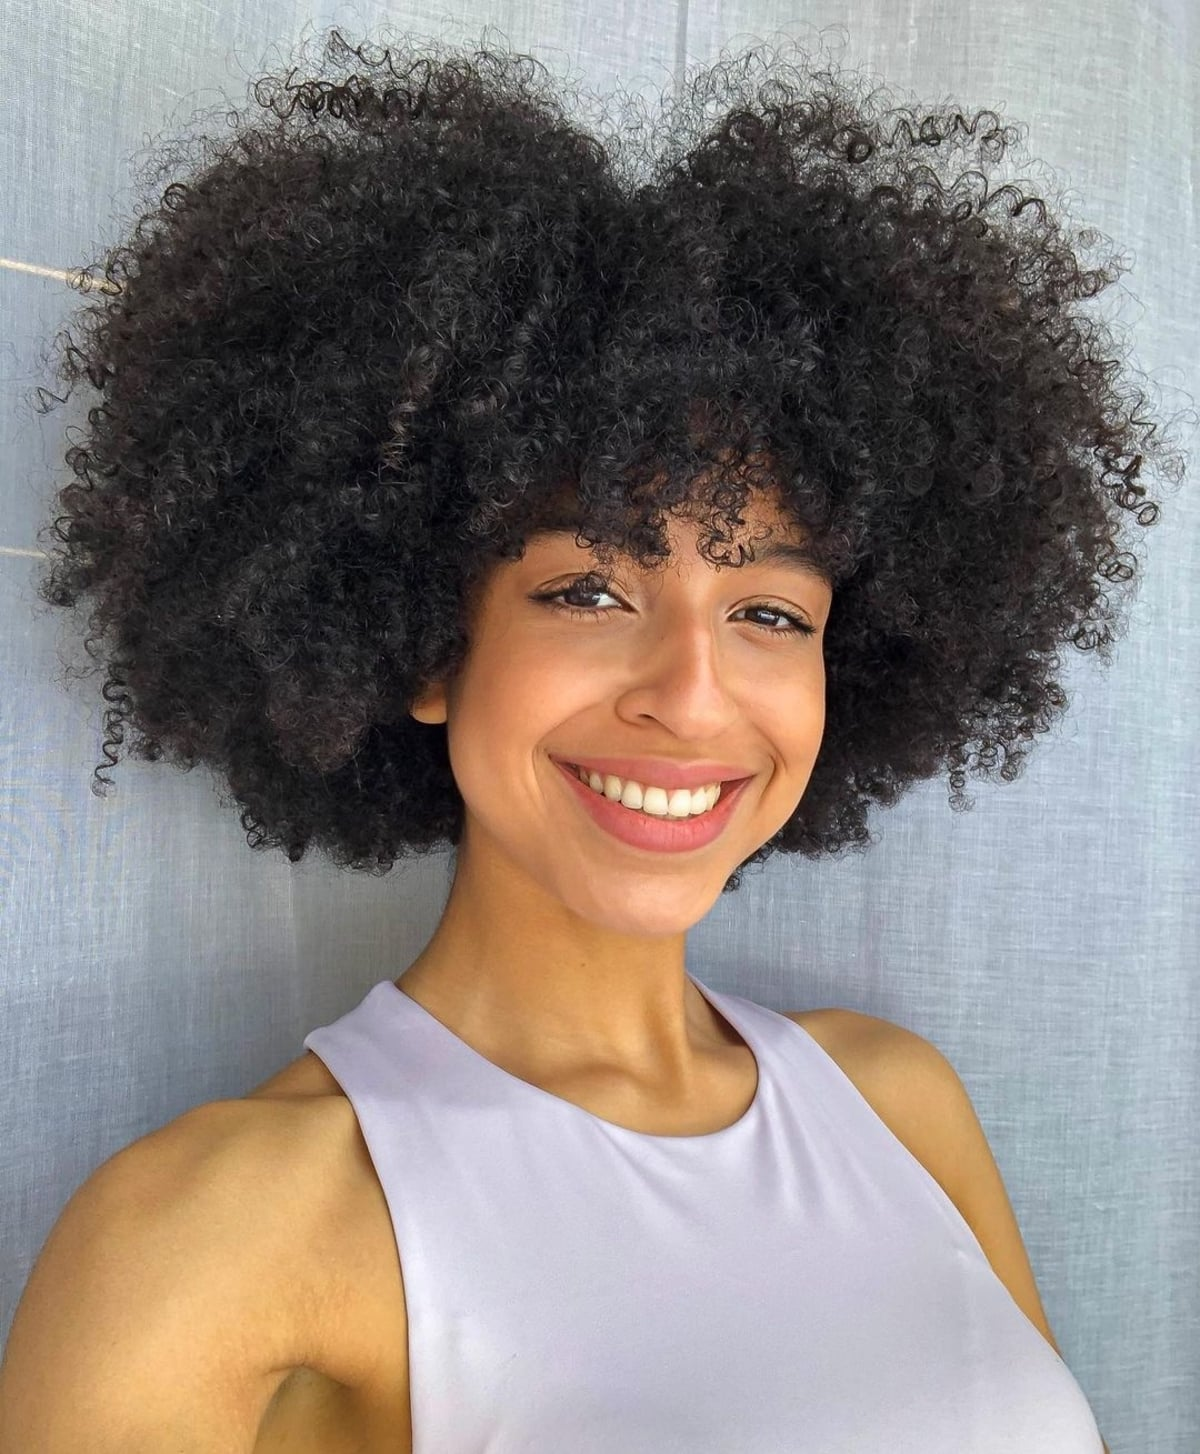 Afro with bangs